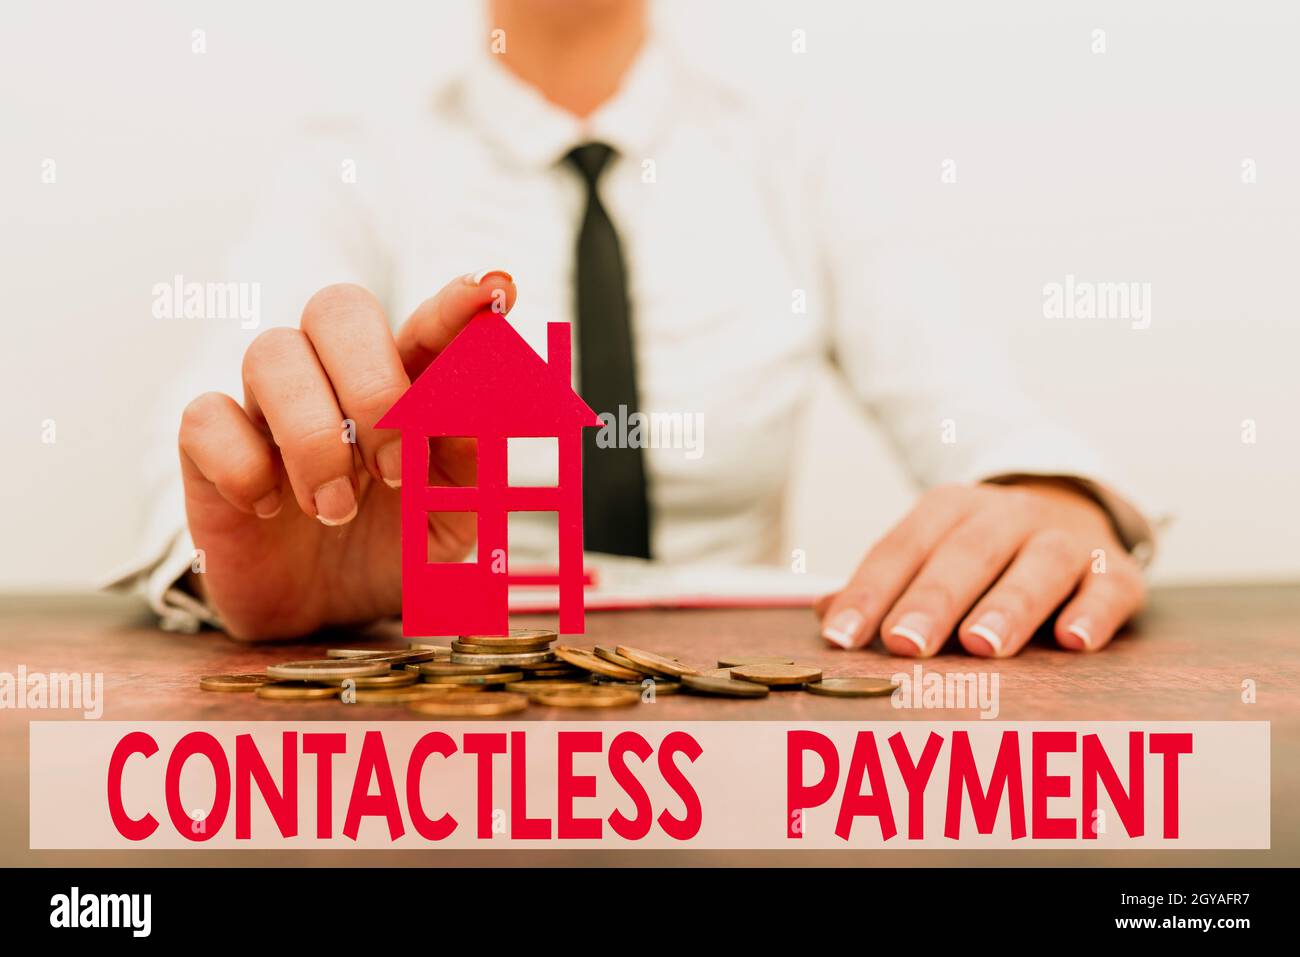 Inspiration showing sign Contactless Payment, Business idea use near field communication for making secure payments New home installments and investme Stock Photo